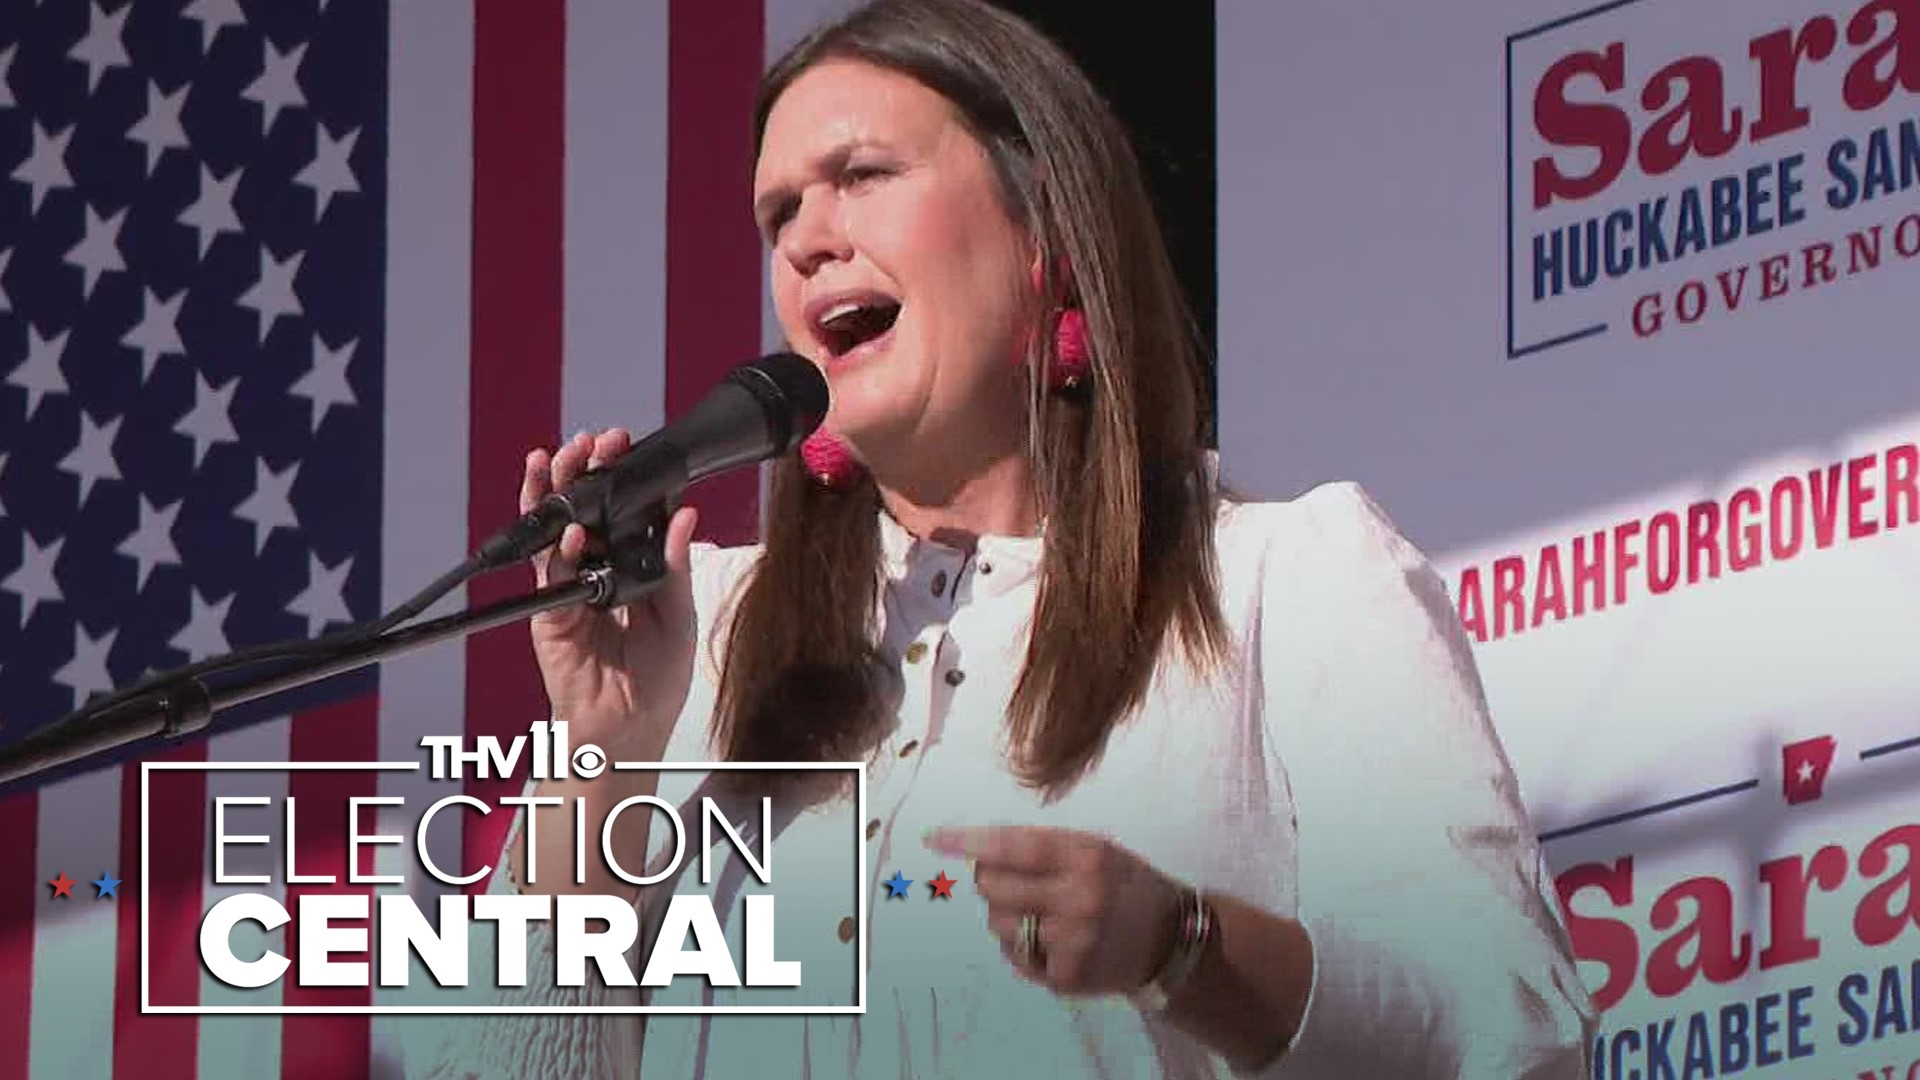 Republican candidate Sarah Huckabee Sanders has defeated Doc Washburn to win the Republican nomination for Arkansas governor.